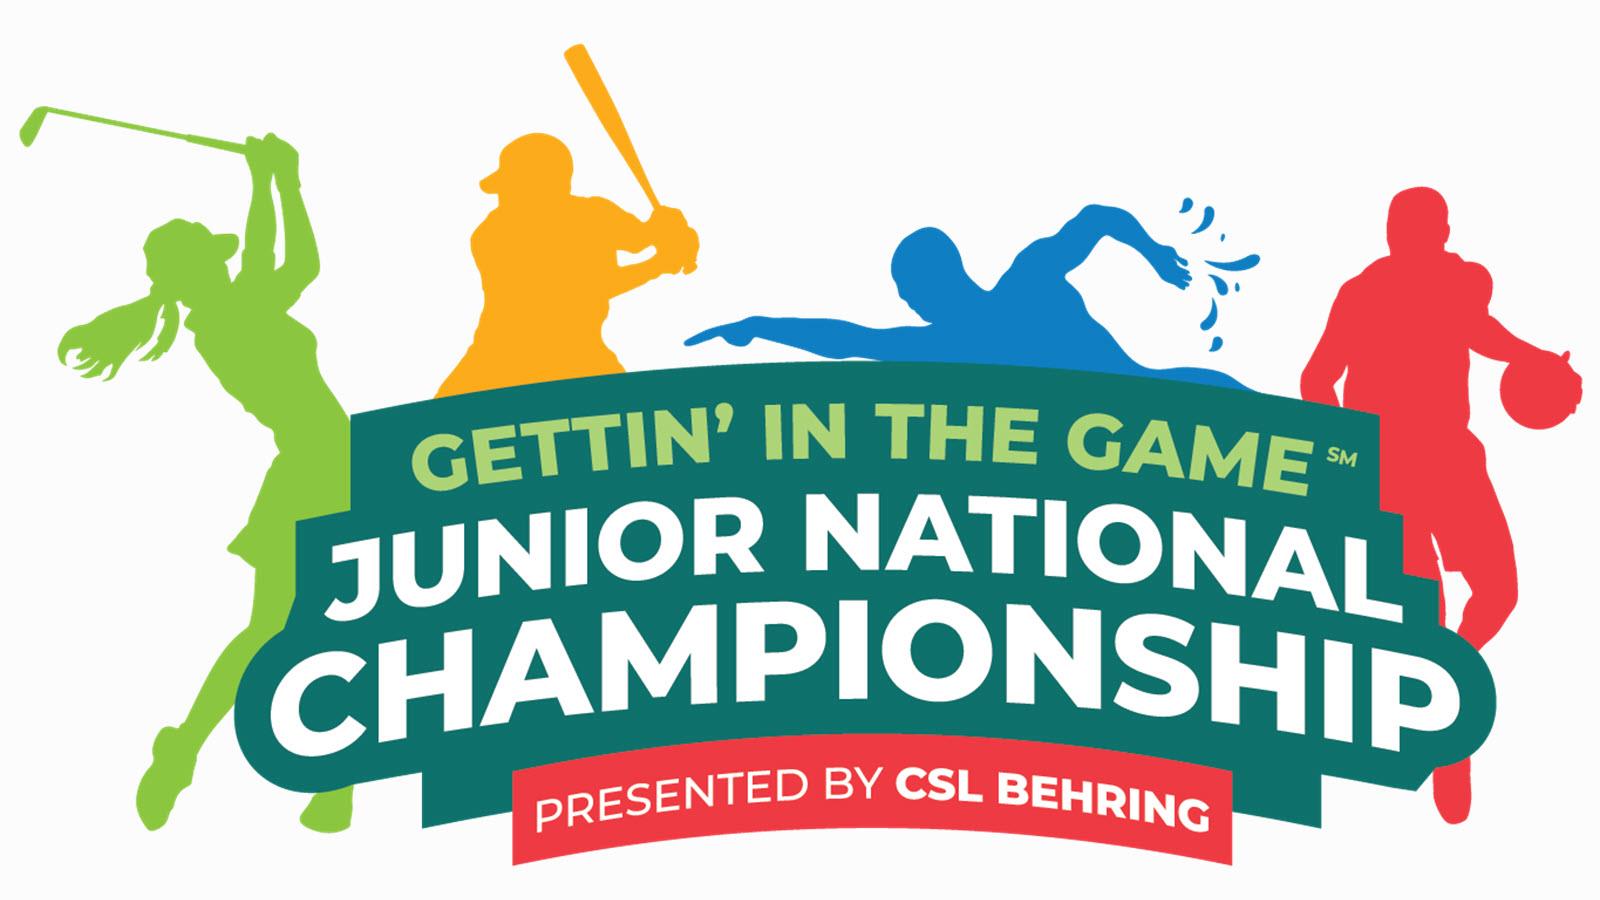 Gettin' In The Game Junior National Championship presented by CSL Behring with silhouettes of a golfer, baseball player, swimmer and basketball player